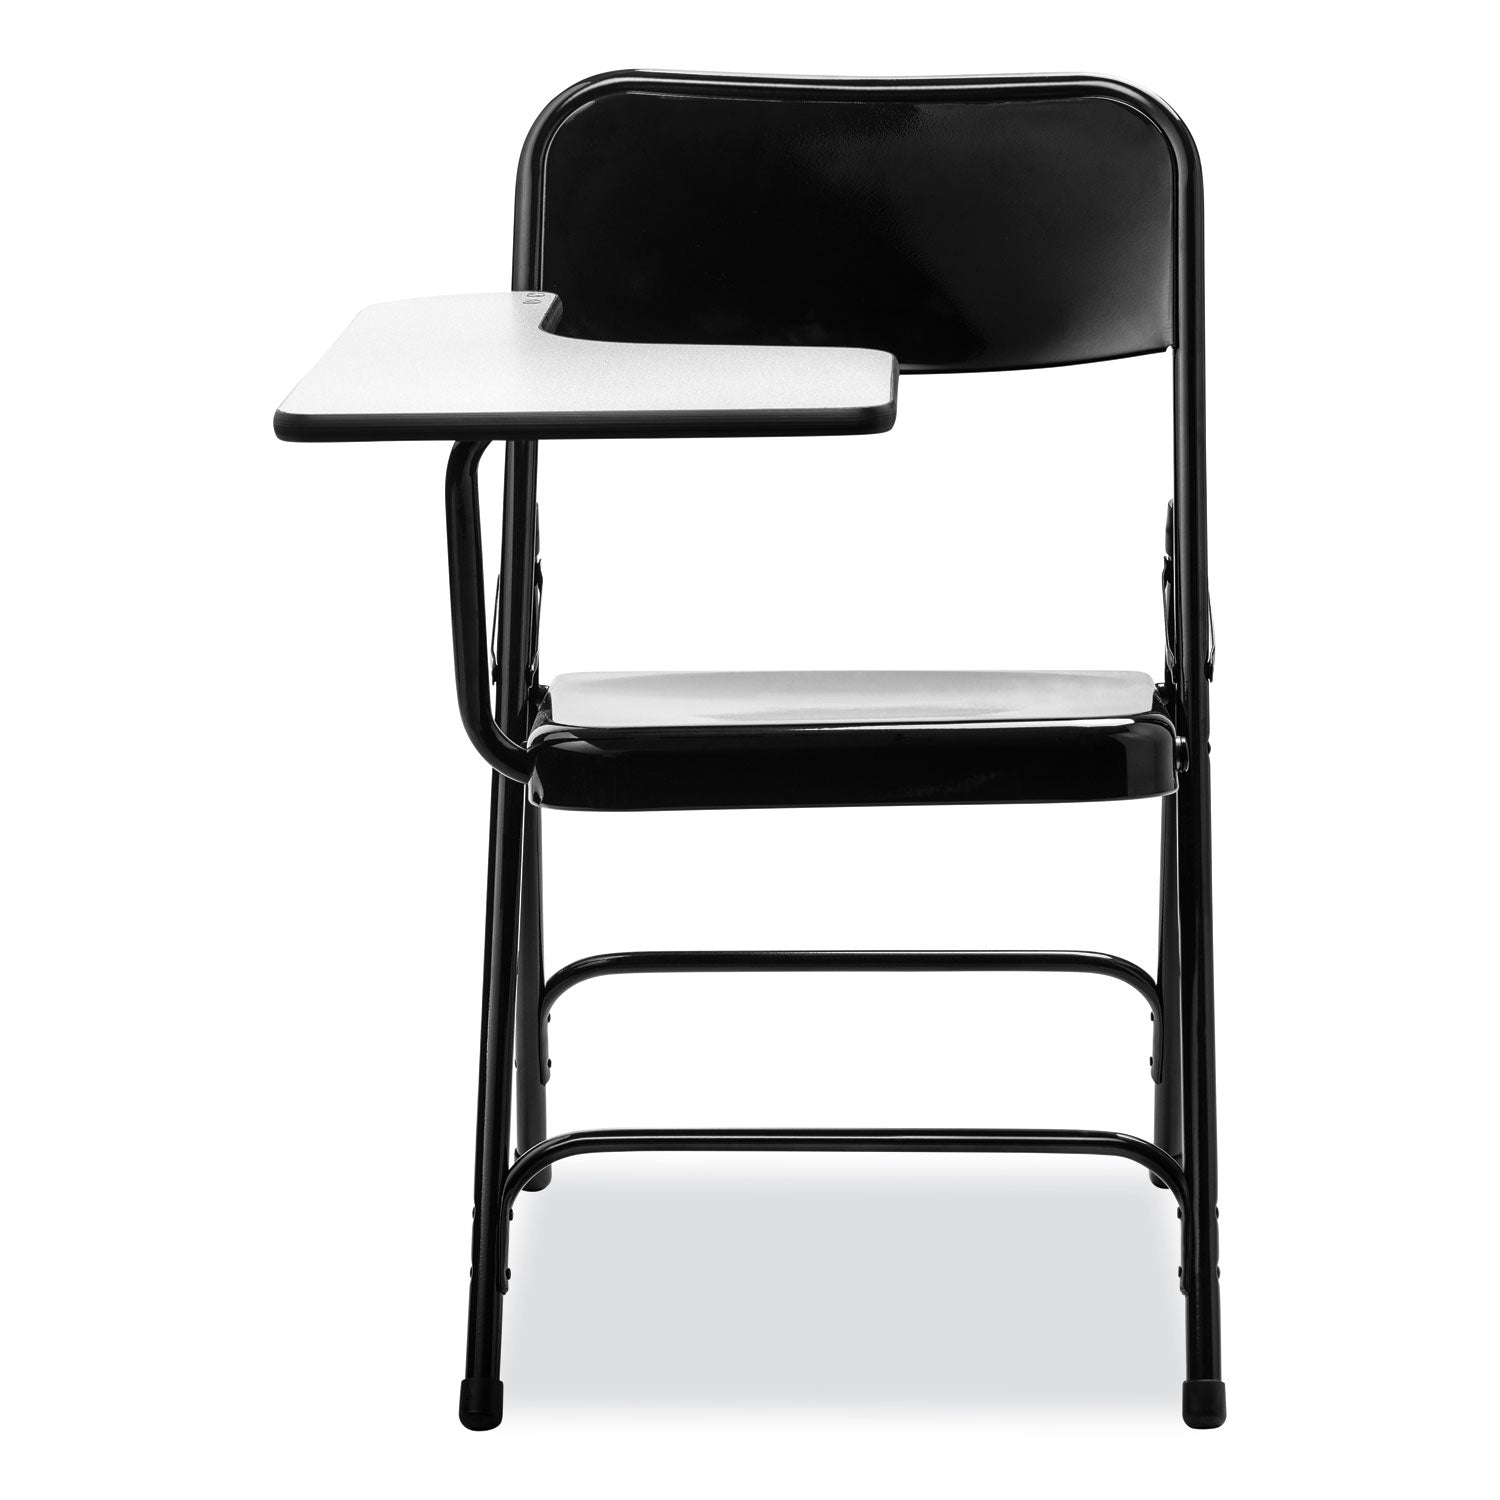 5200-series-right-side-tablet-arm-folding-chair-supports-up-to-480-lb-1725-seat-height-black-2-ctships-in-1-3-bus-days_nps5210r - 2